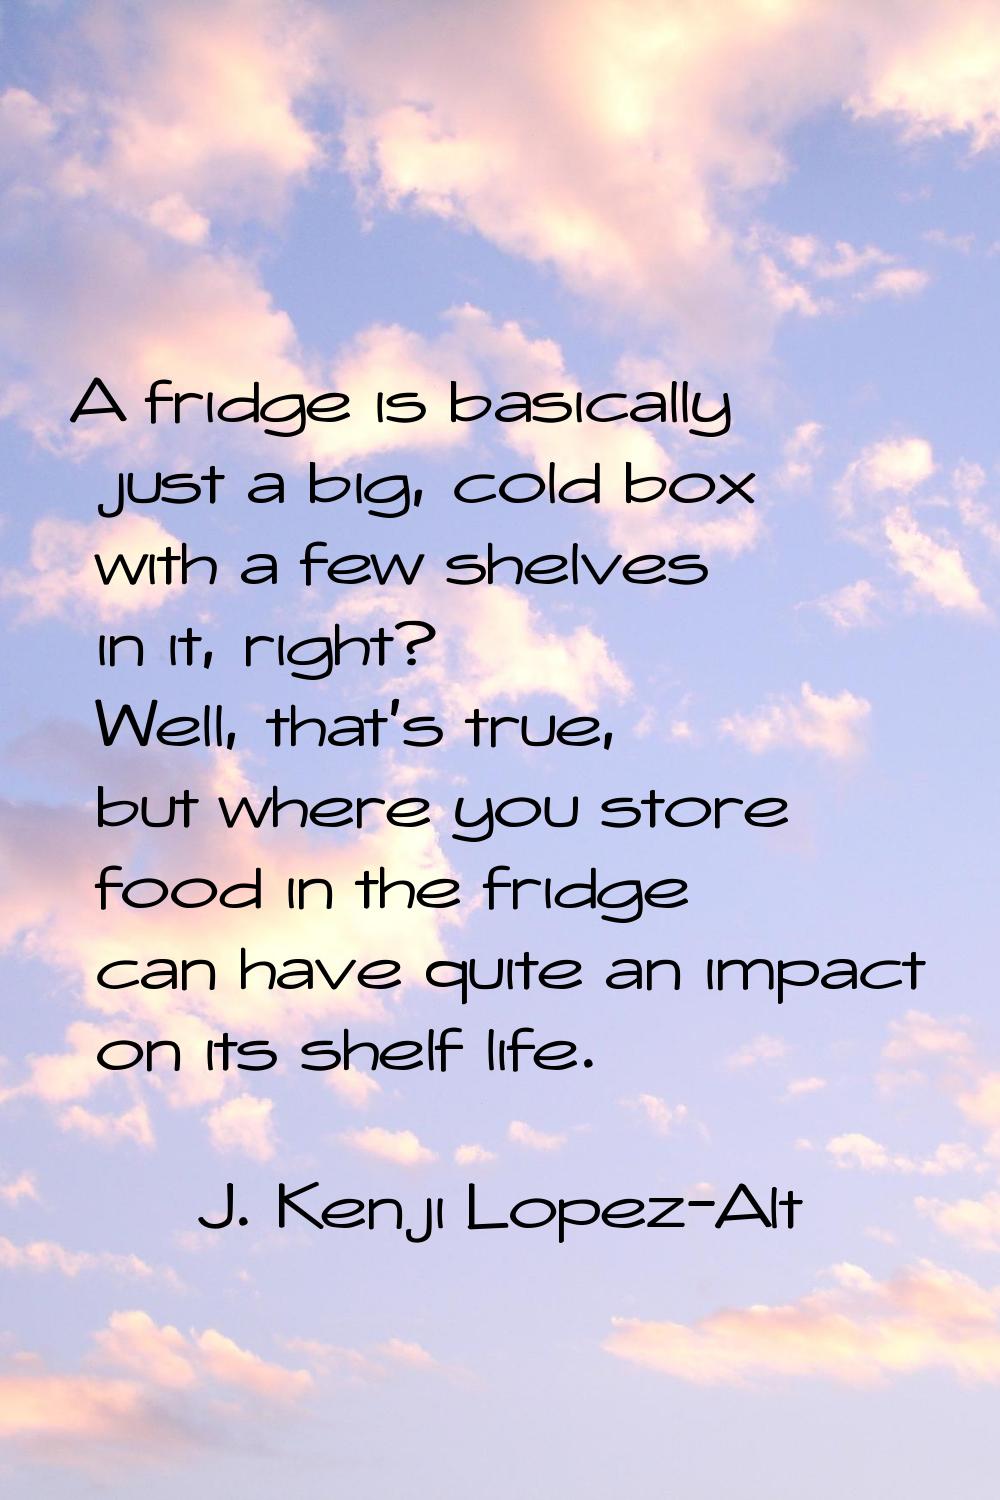 A fridge is basically just a big, cold box with a few shelves in it, right? Well, that's true, but 